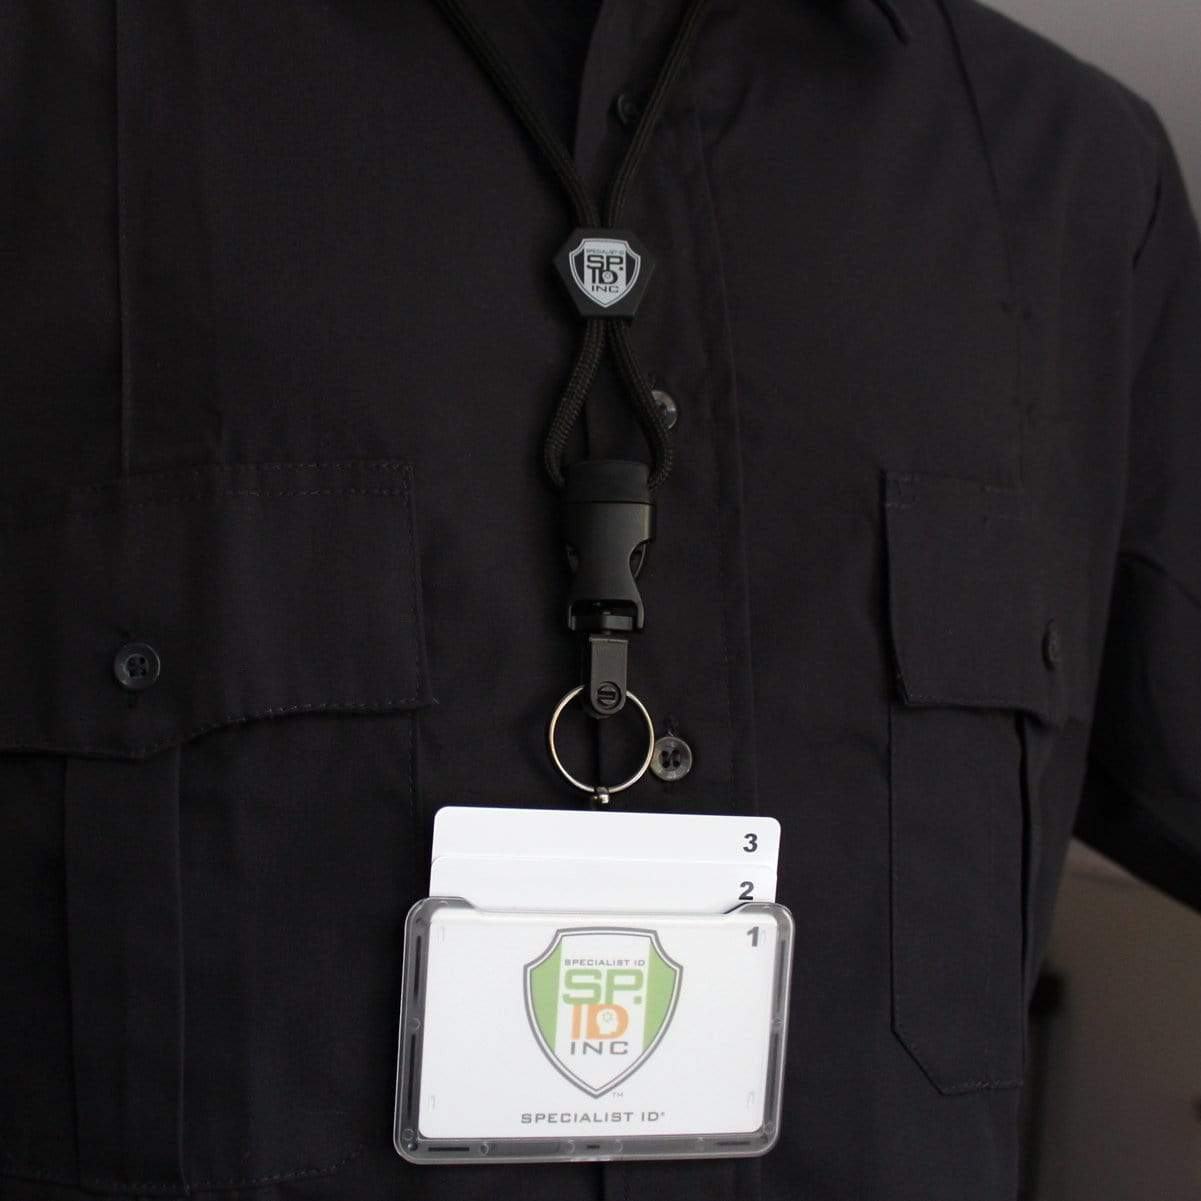 A person in professional work wear is sporting a black shirt with a Specialist ID Horizontal 3 Card Badge Holder & Heavy Duty Lanyard with Breakaway Clip and Key Ring - Hard Plastic Rigid Name Tag Protector - Top Load for Three Badges from "Specialist ID" around their neck. The badge holder contains a name badge and two additional cards.